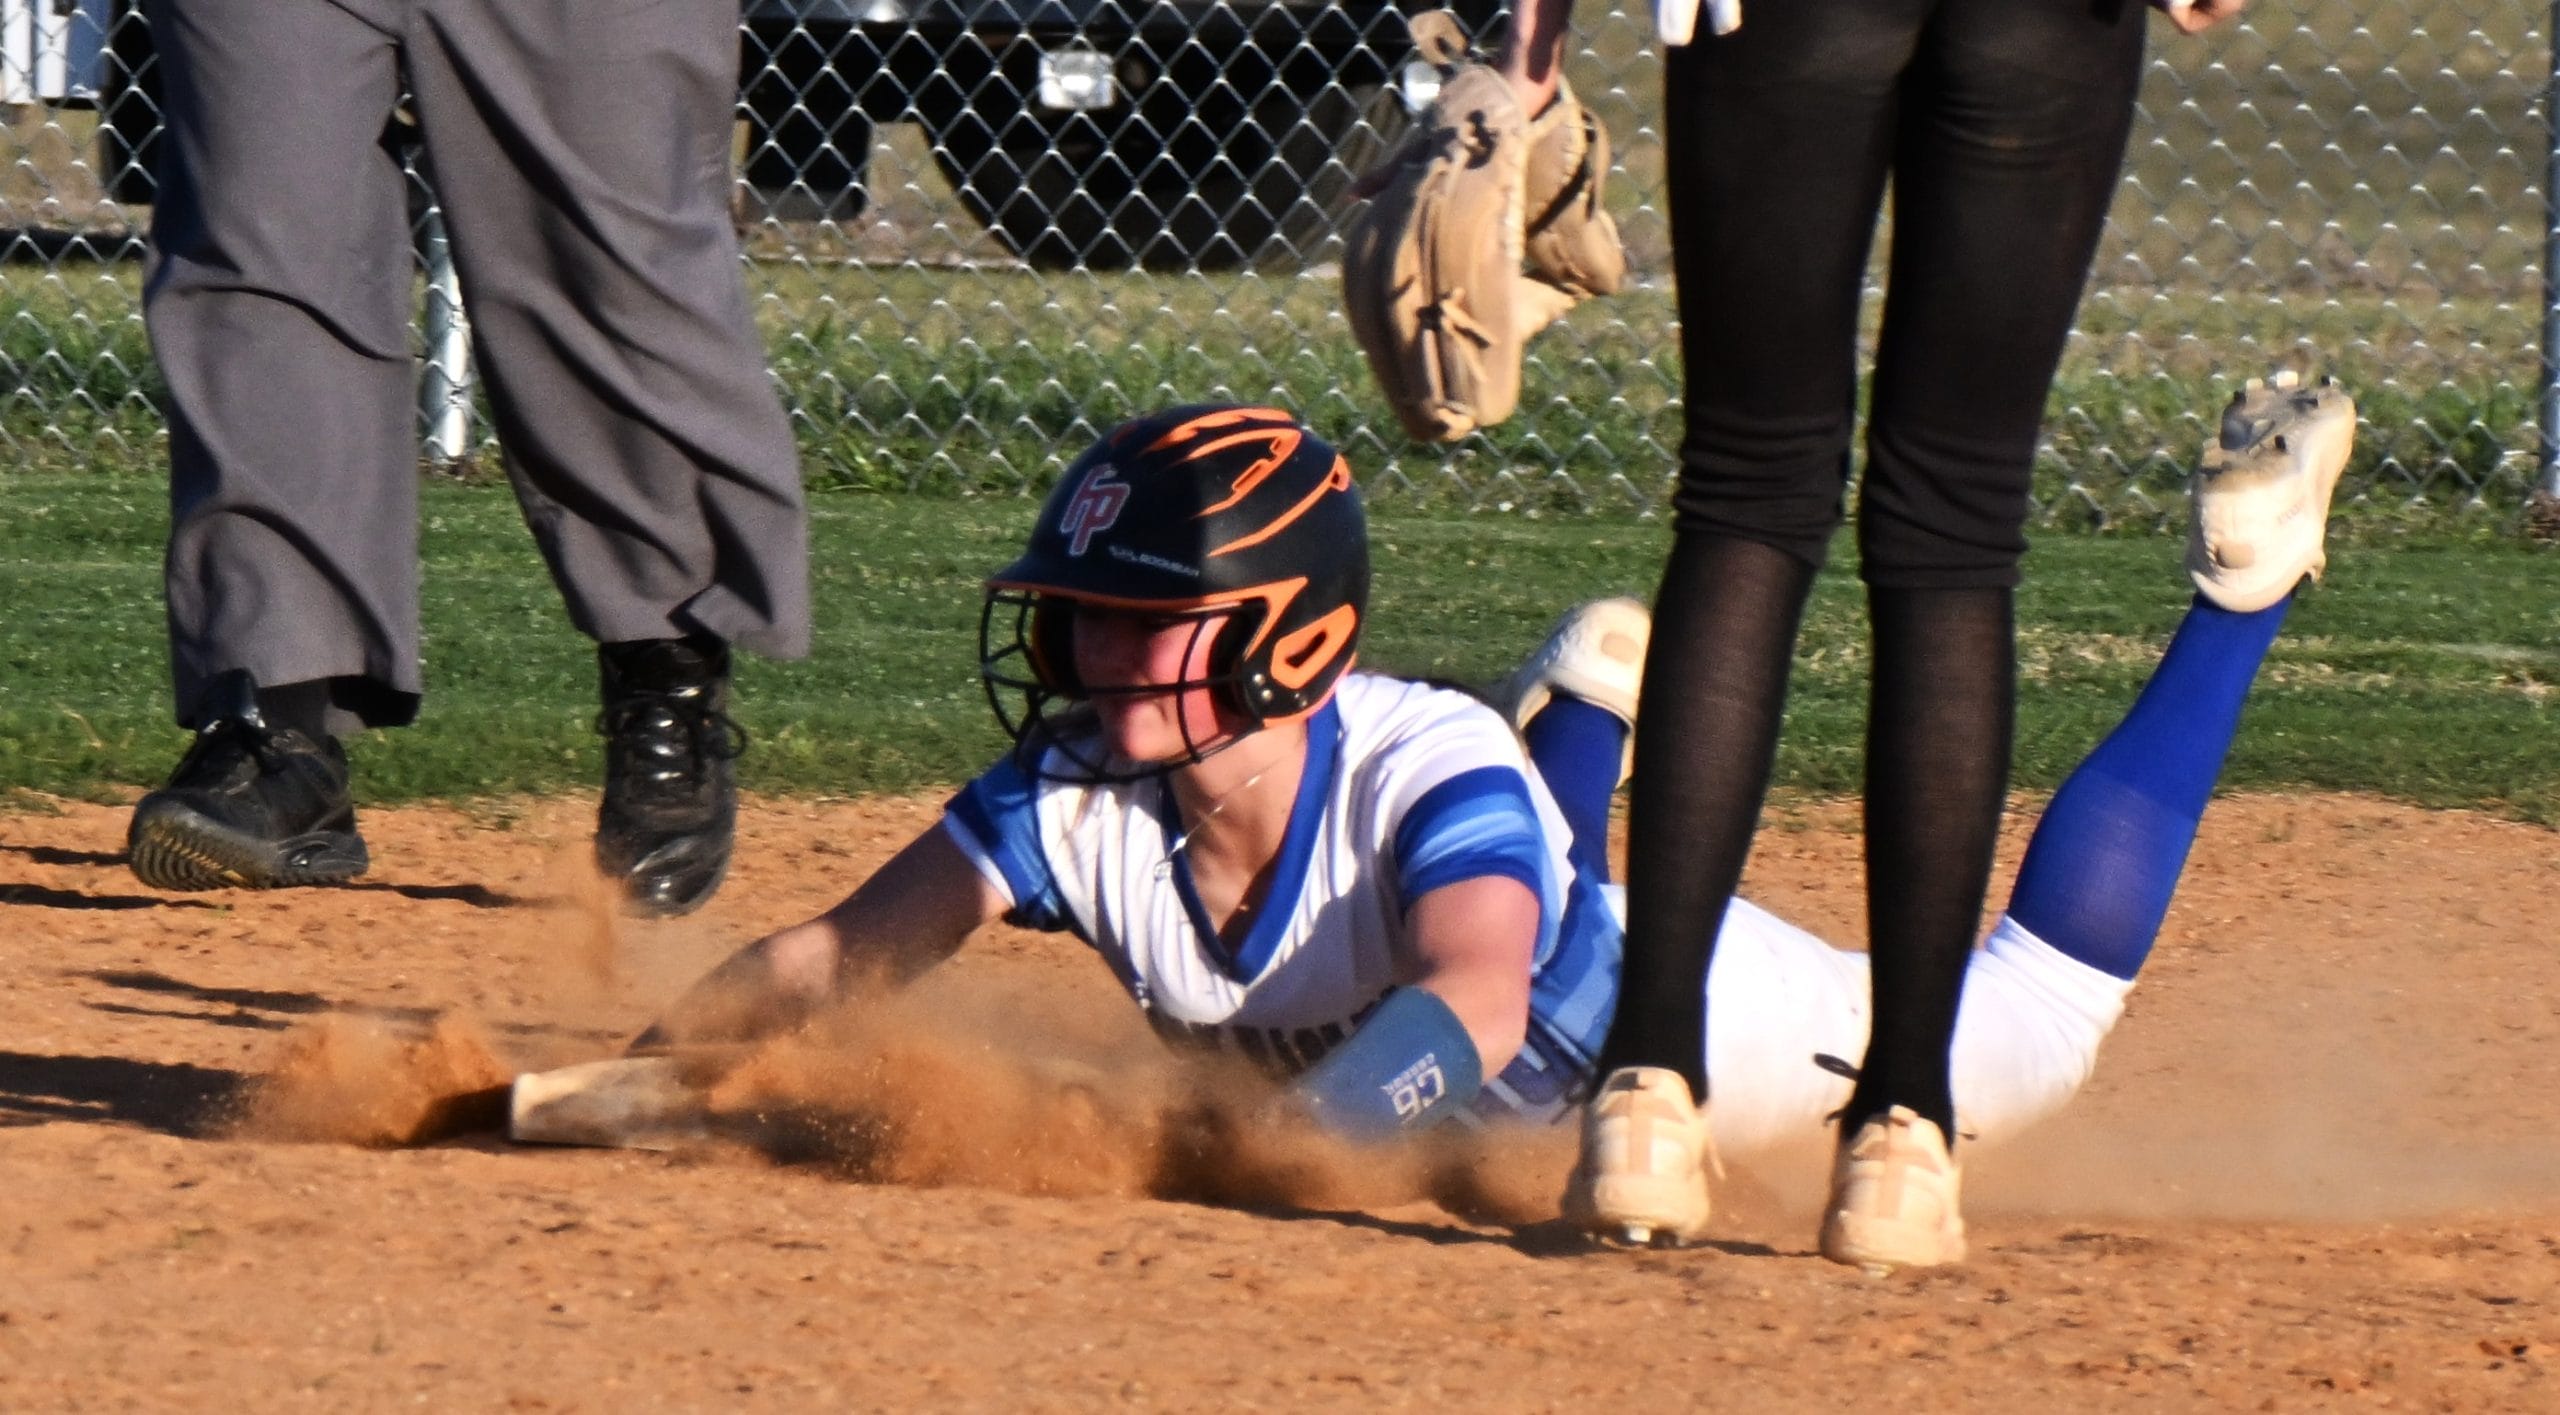 Eagles down Grace of Sanford, 10-1, in softball